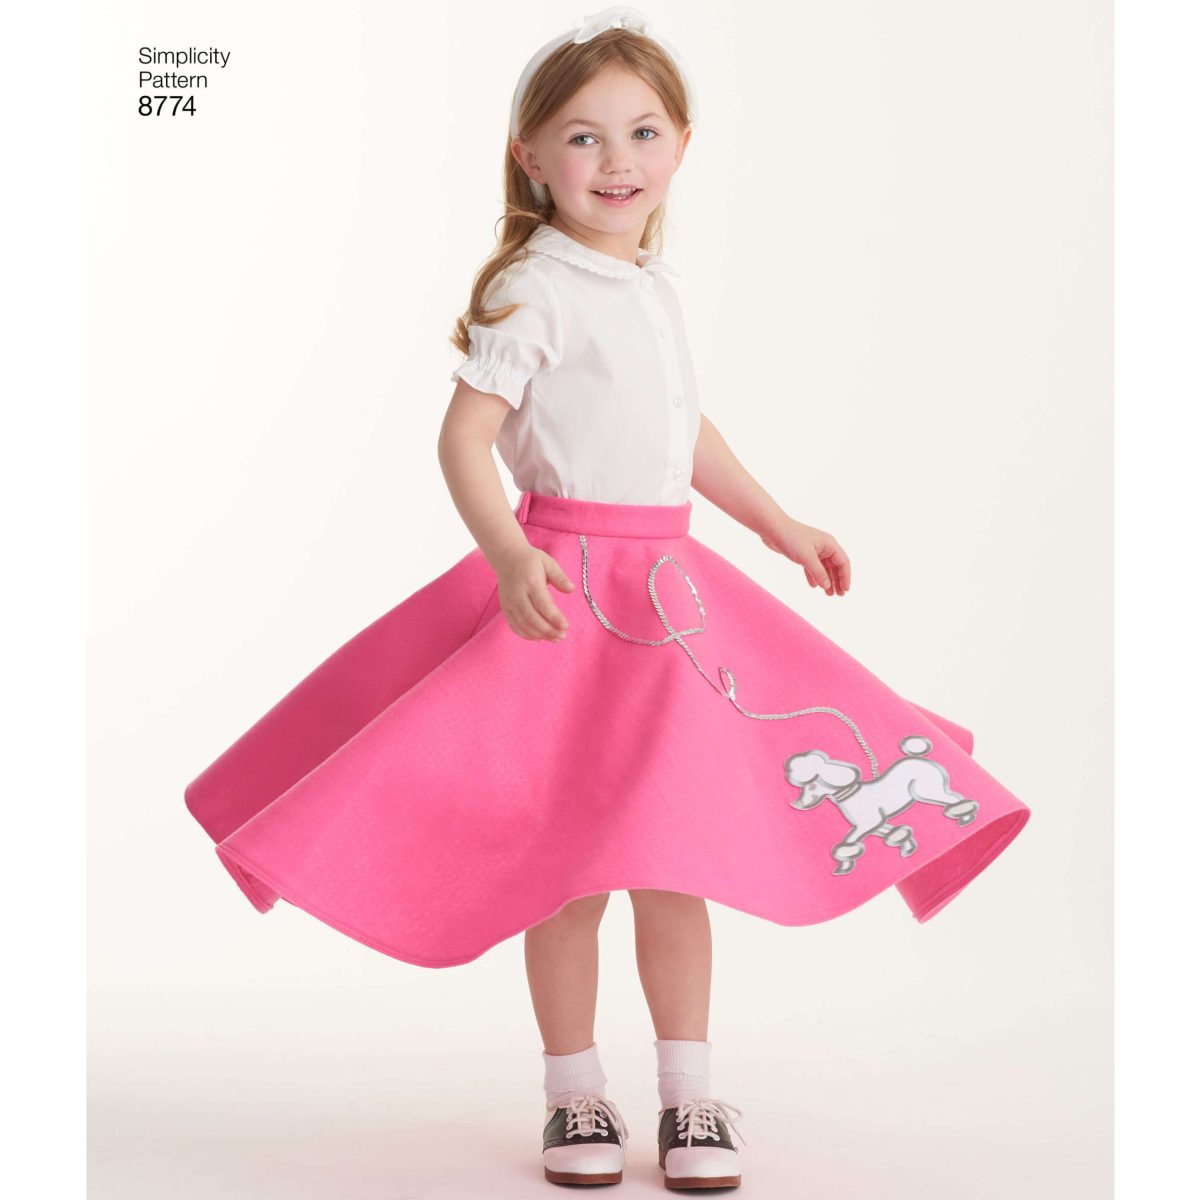 Simplicity Sewing Pattern 8774 Child's and Girls' Costumes